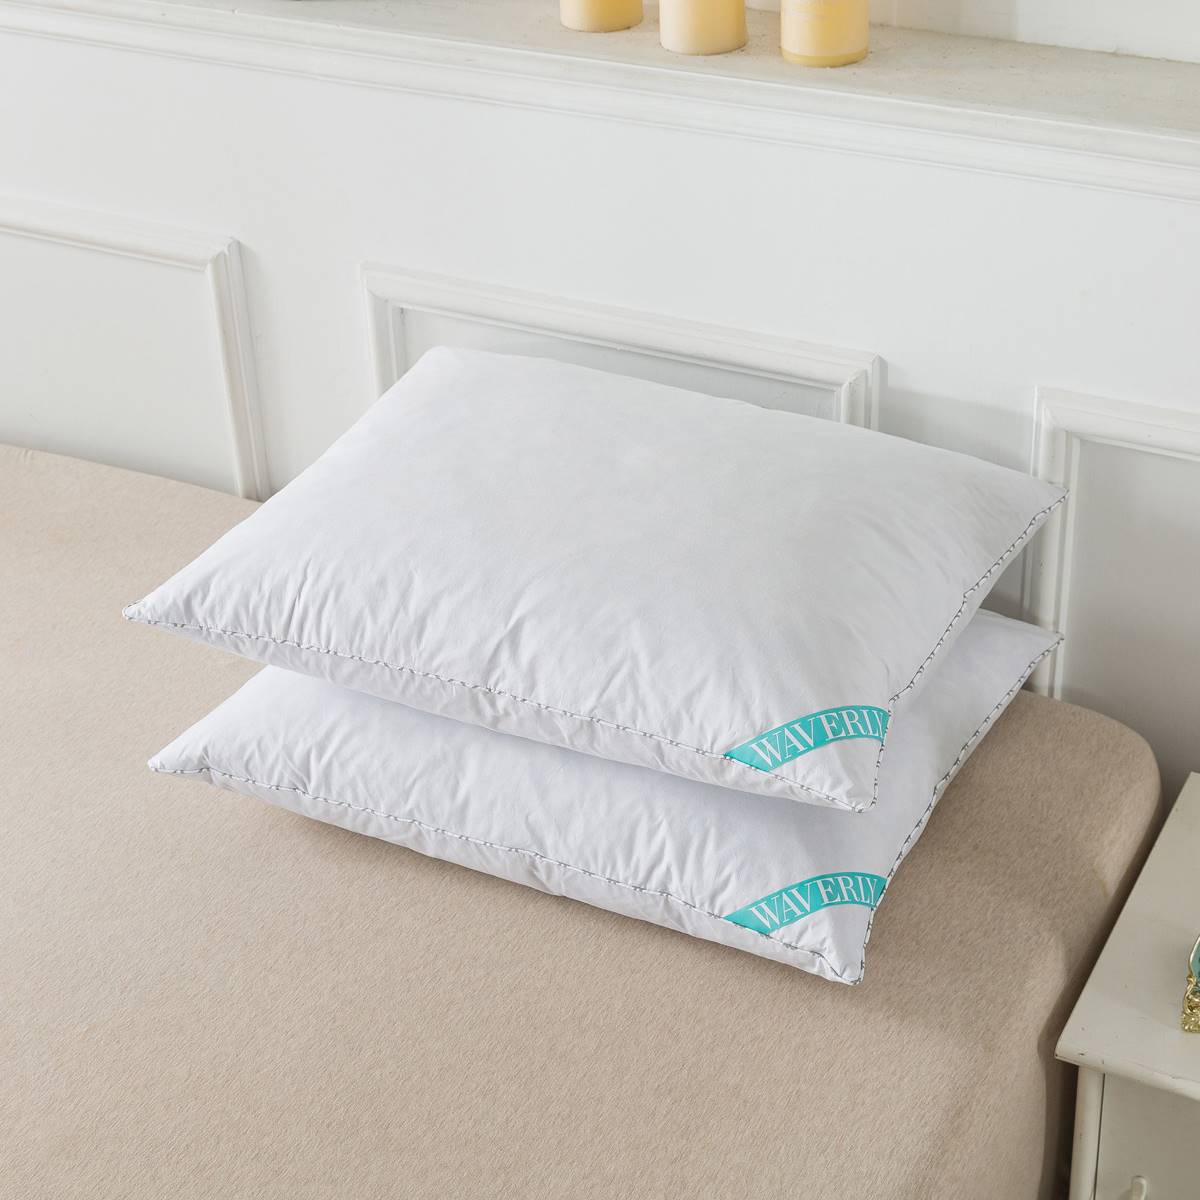 Waverly Antimicrobial Goose Nano Feather Pillows - 2 Pack